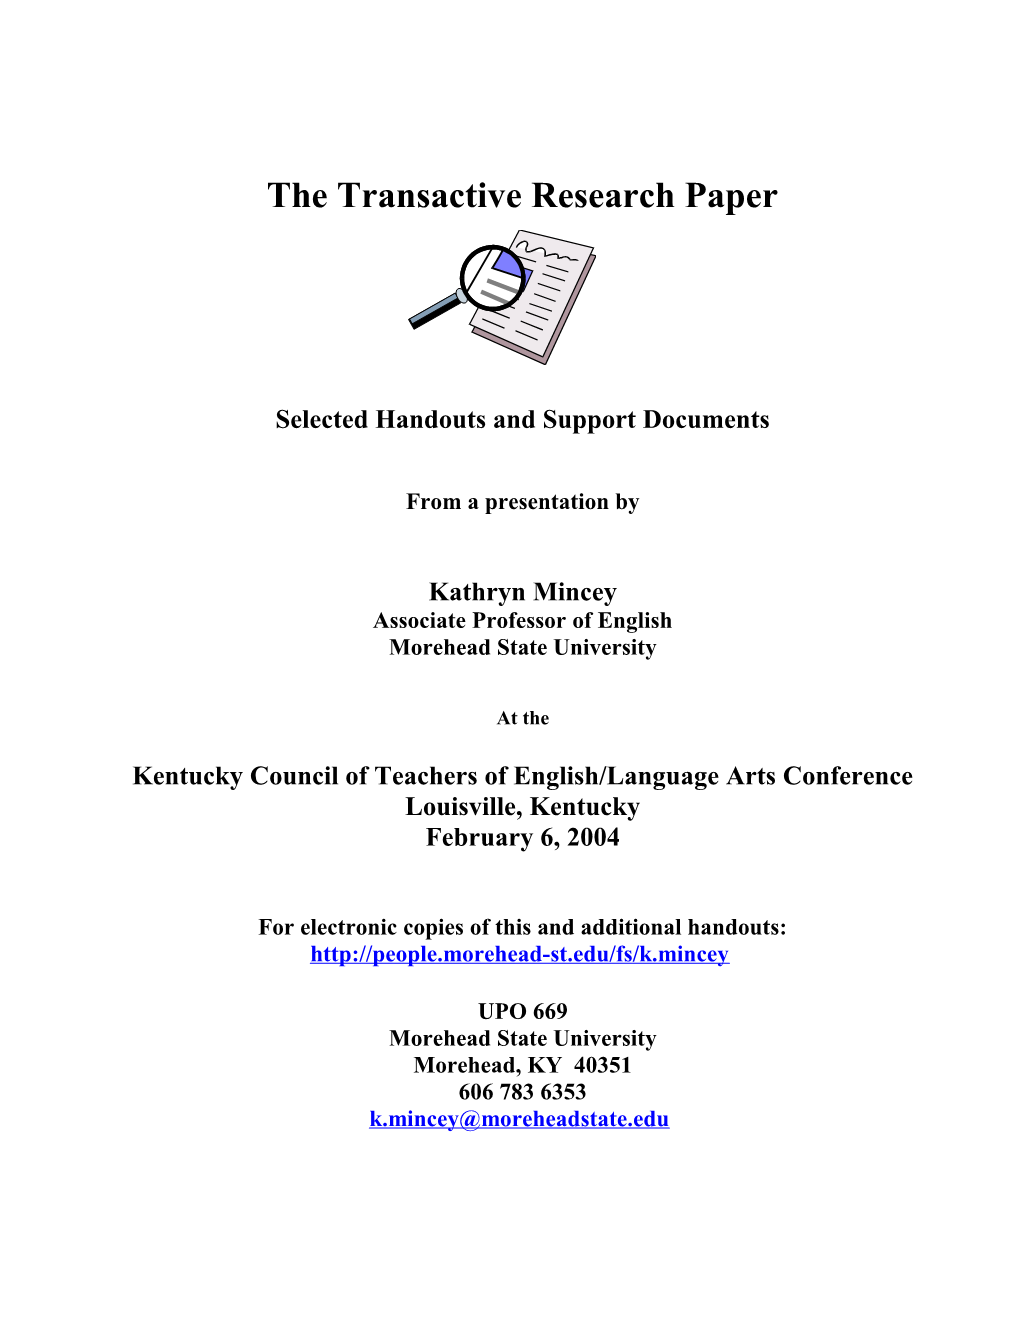 The Transactive Research Paper